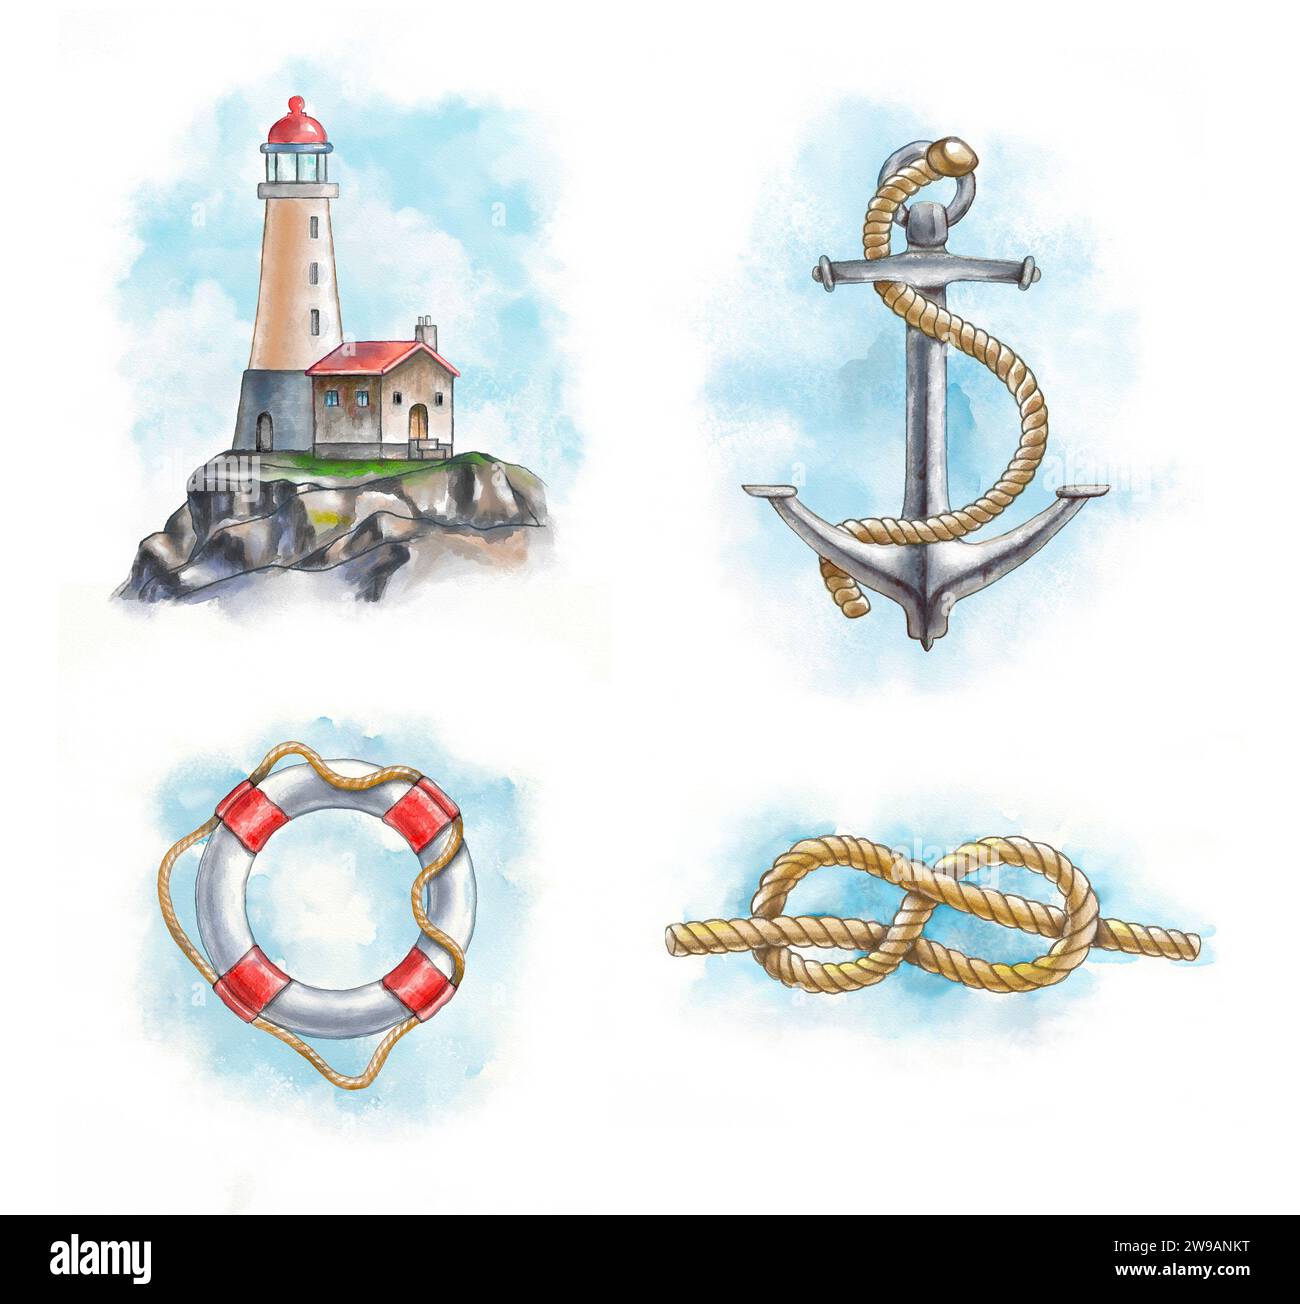 Lighthouse, anchor, lifesaver and knot. Hand-painted digital illustration. Included clipping path allows to separate objects from background. Stock Photo